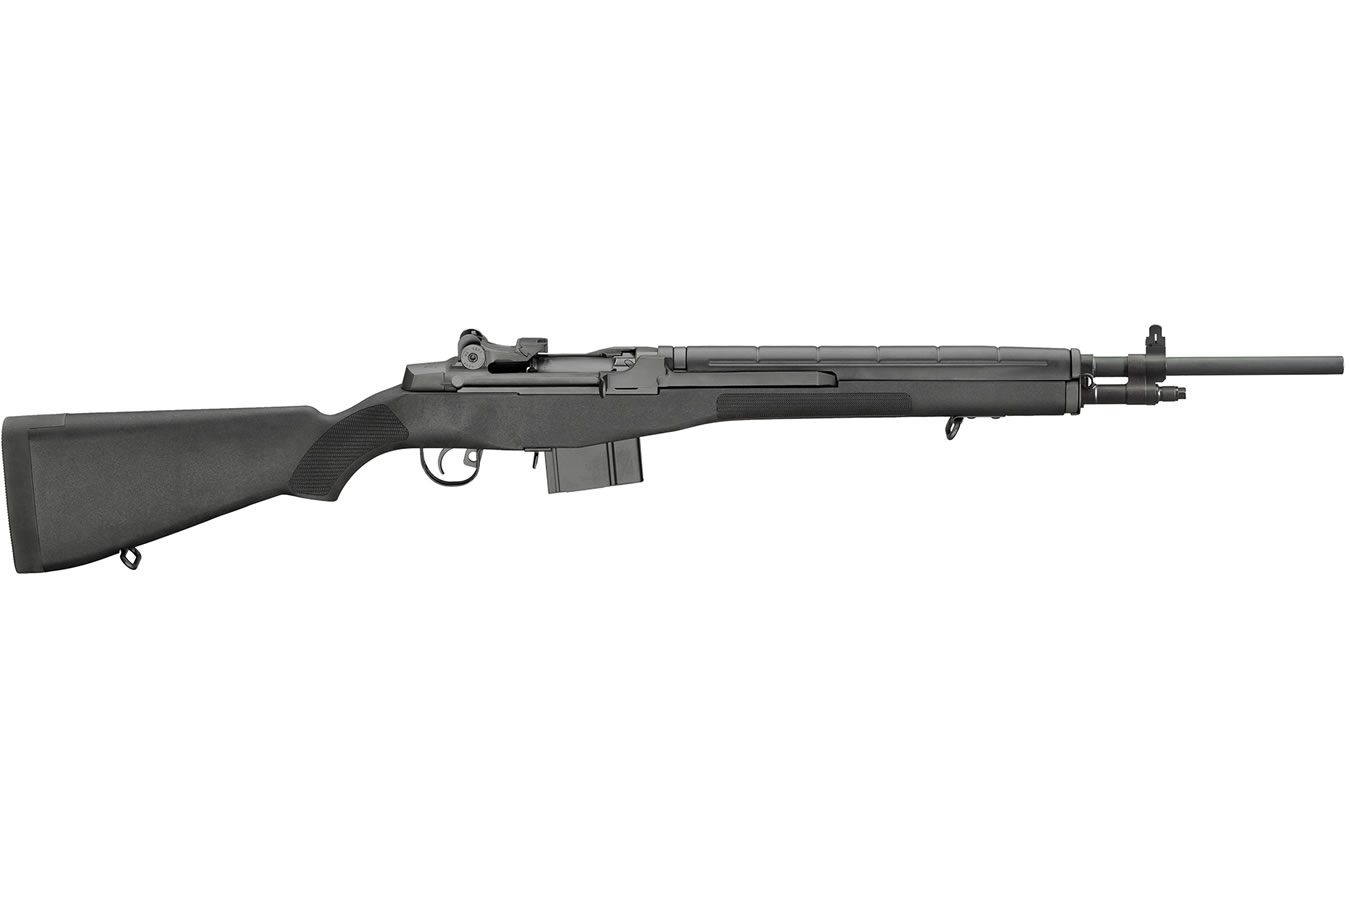 SPRINGFIELD M1A LOADED 308 WITH BLACK (NY COMPLIANT)